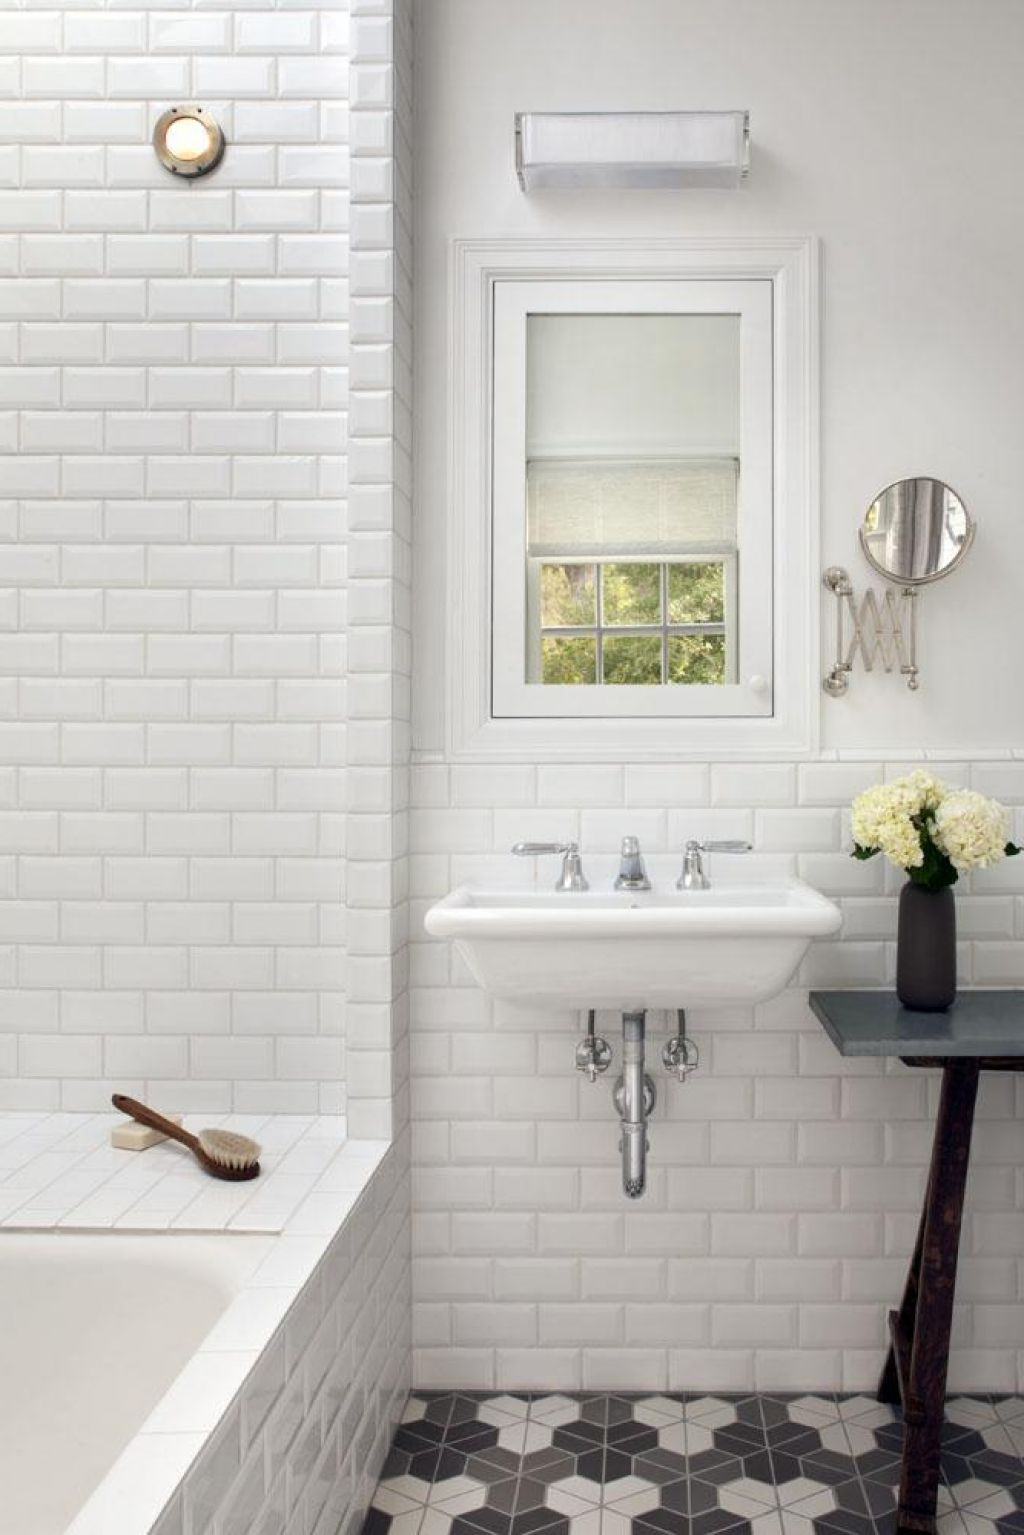 Subway Tile Bathroom
 Bathroom Subway Tile Bathrooms For Your Dream Shower And